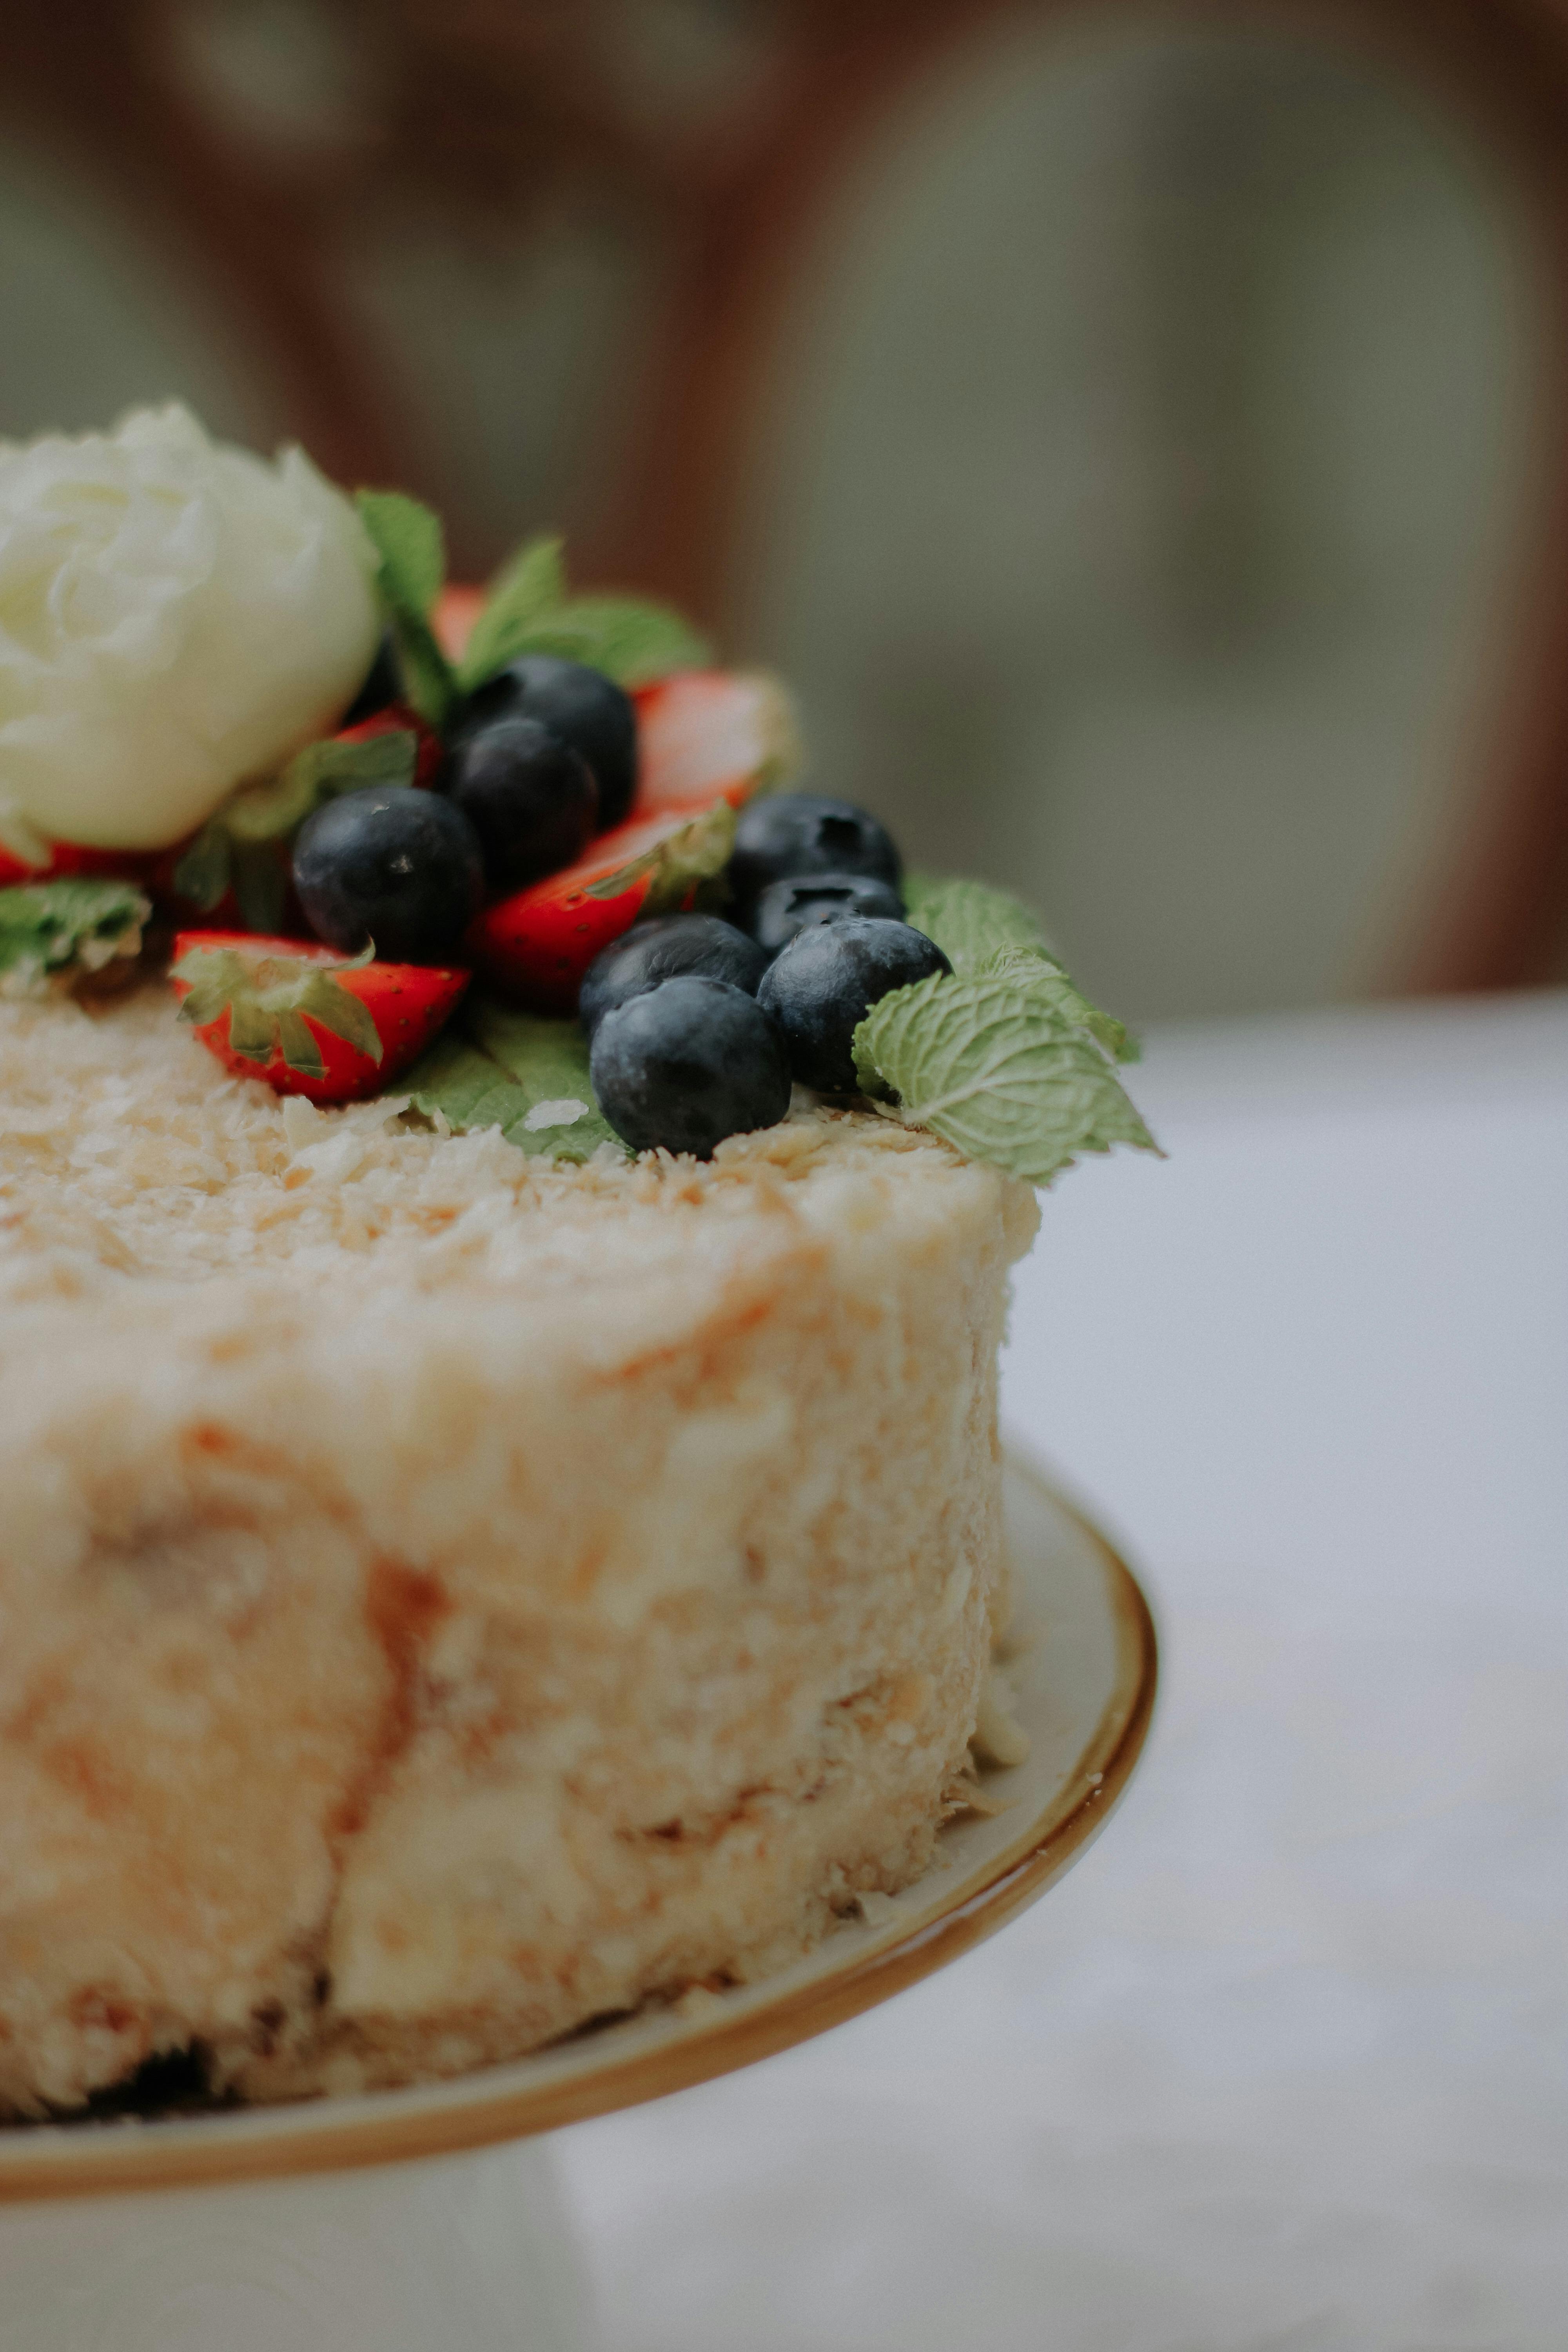 A view of half a cake with strawberries and other fruit | Source: Pexels